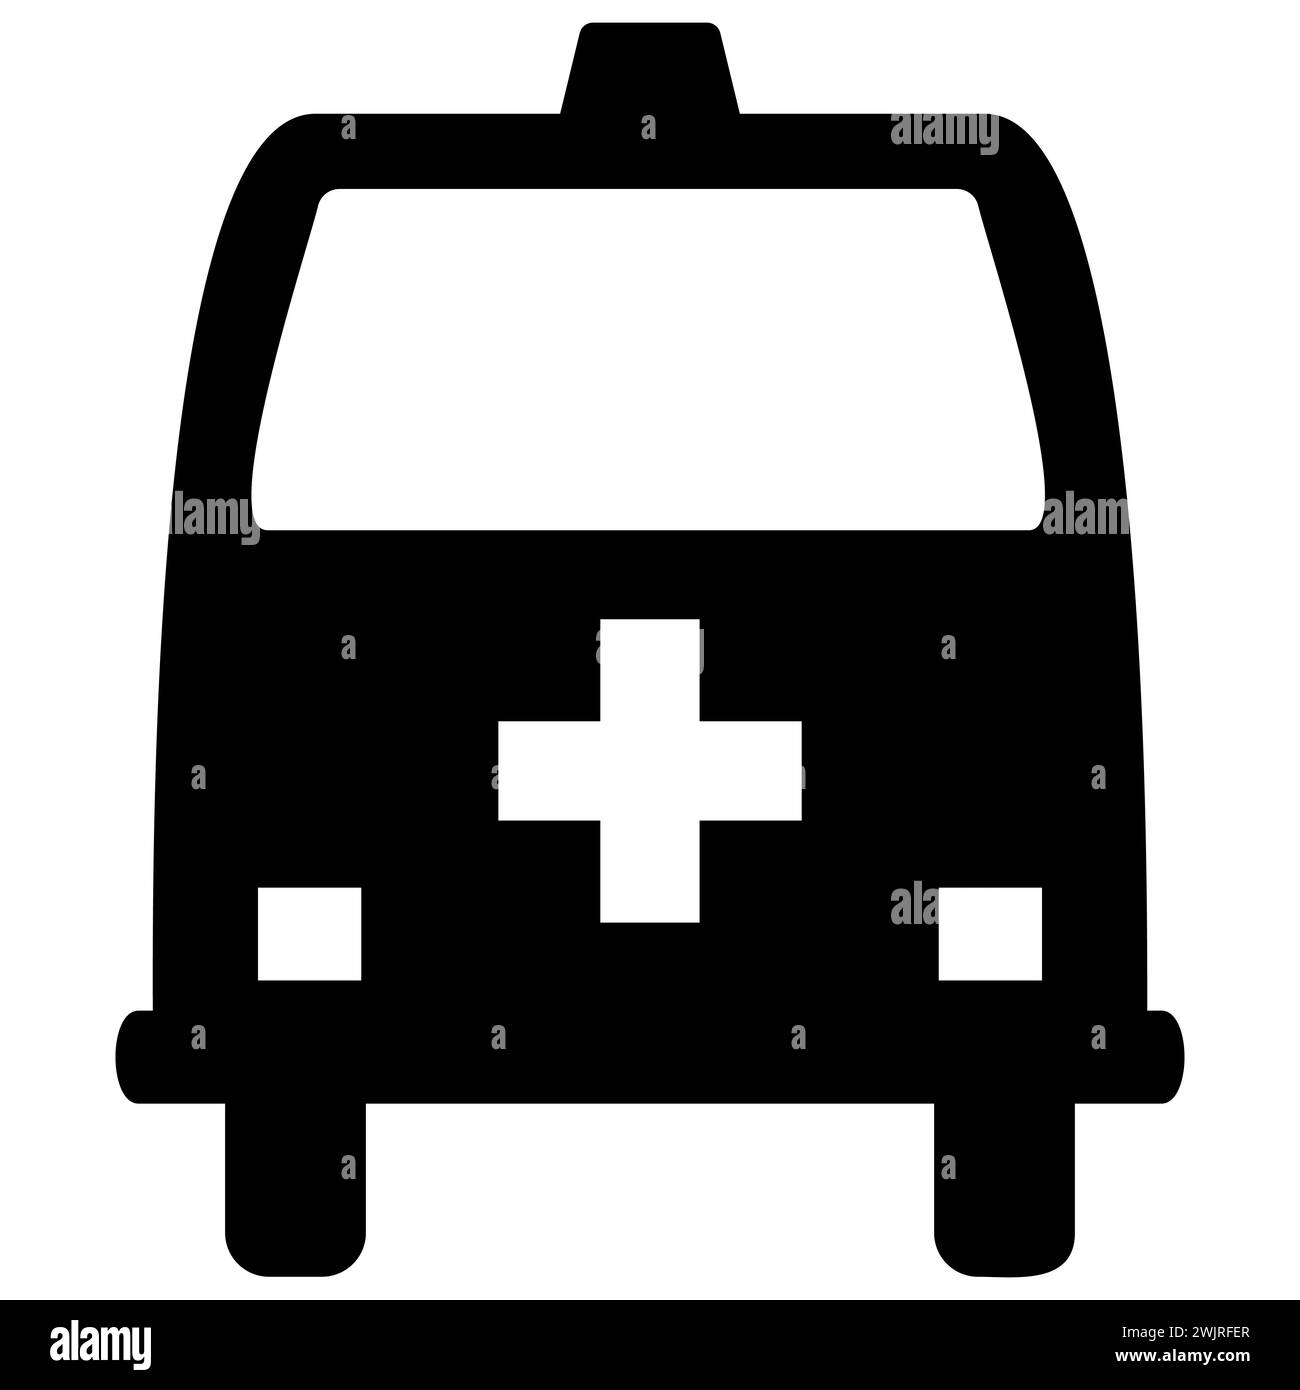 first aid kit. Ambulance icon on white background. Ambulance car icon, Vector isolated simple flat illustration. Stock Vector